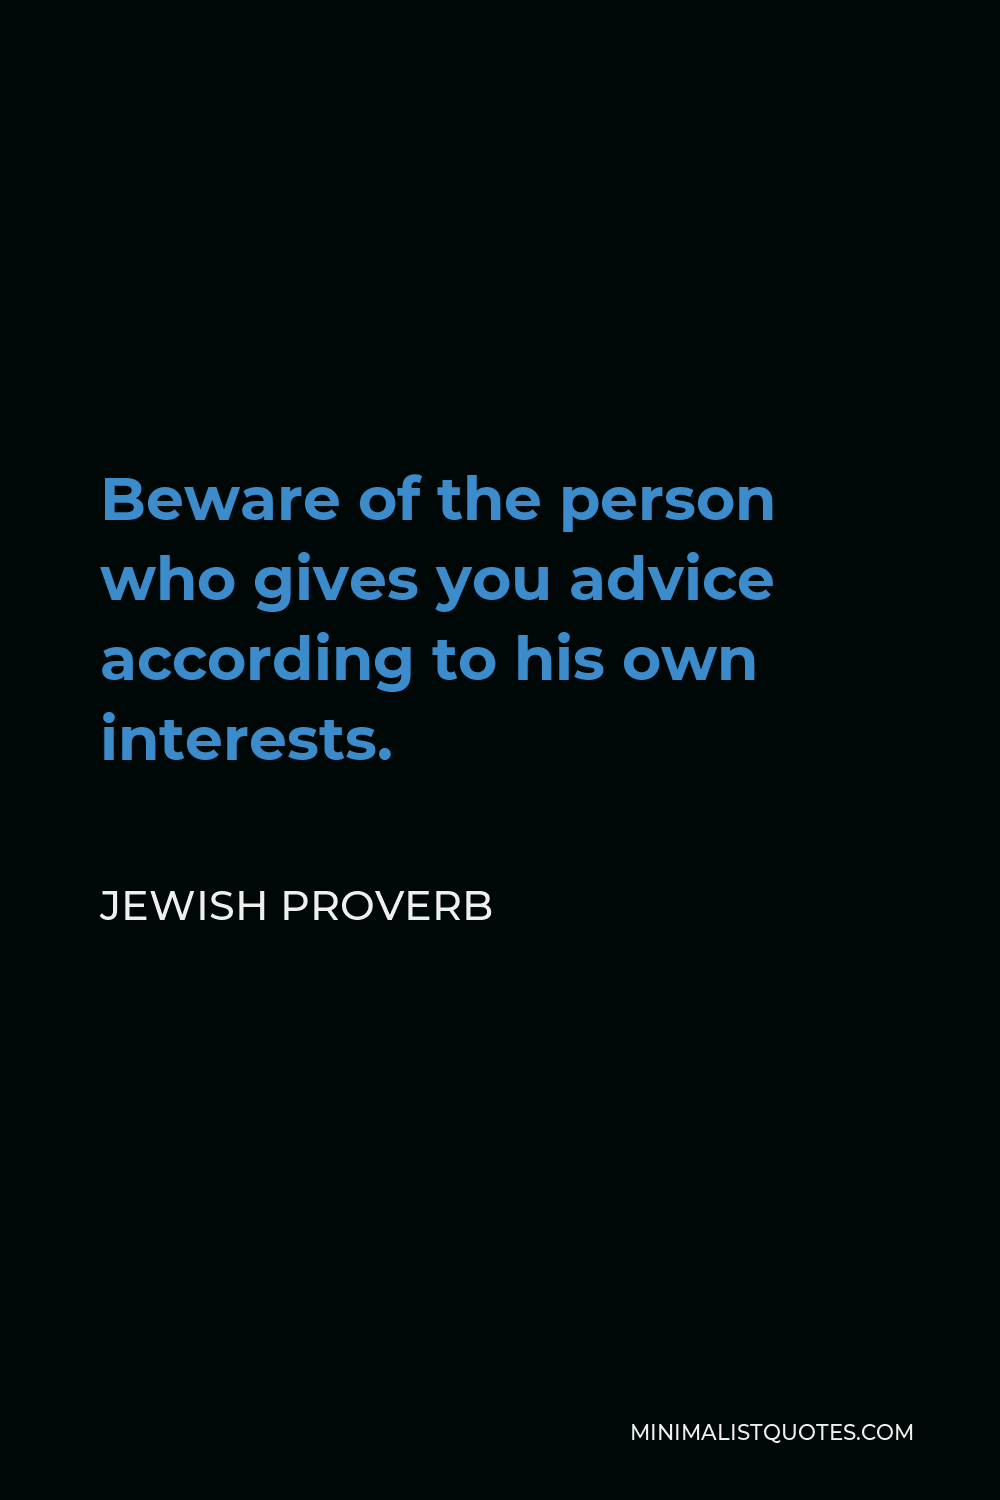 Jewish Proverb Quote - Beware of the person who gives you advice according to his own interests.